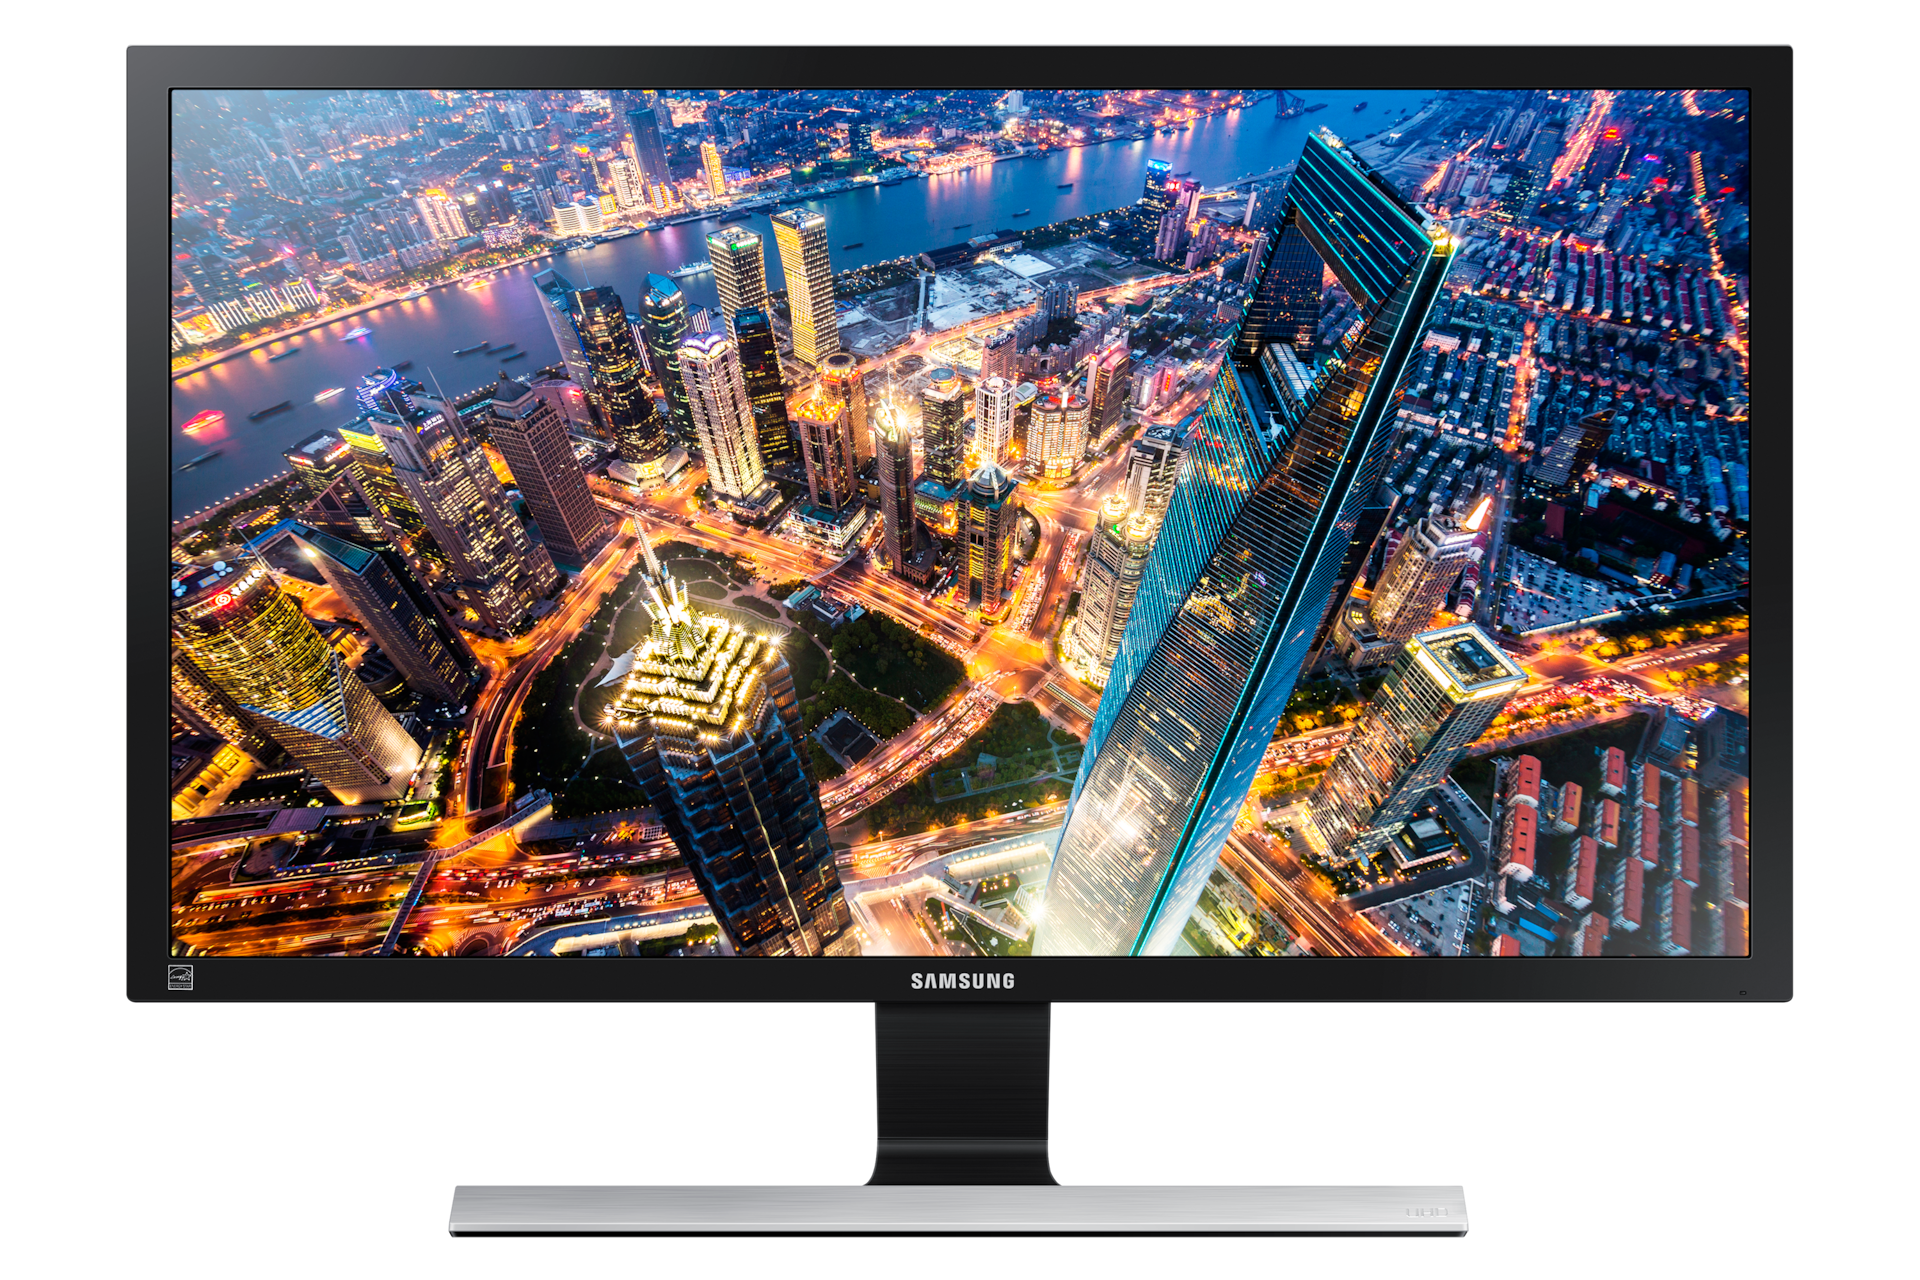 Samsung UHD Monitor (UE590, 28") at Best Price in Malaysia